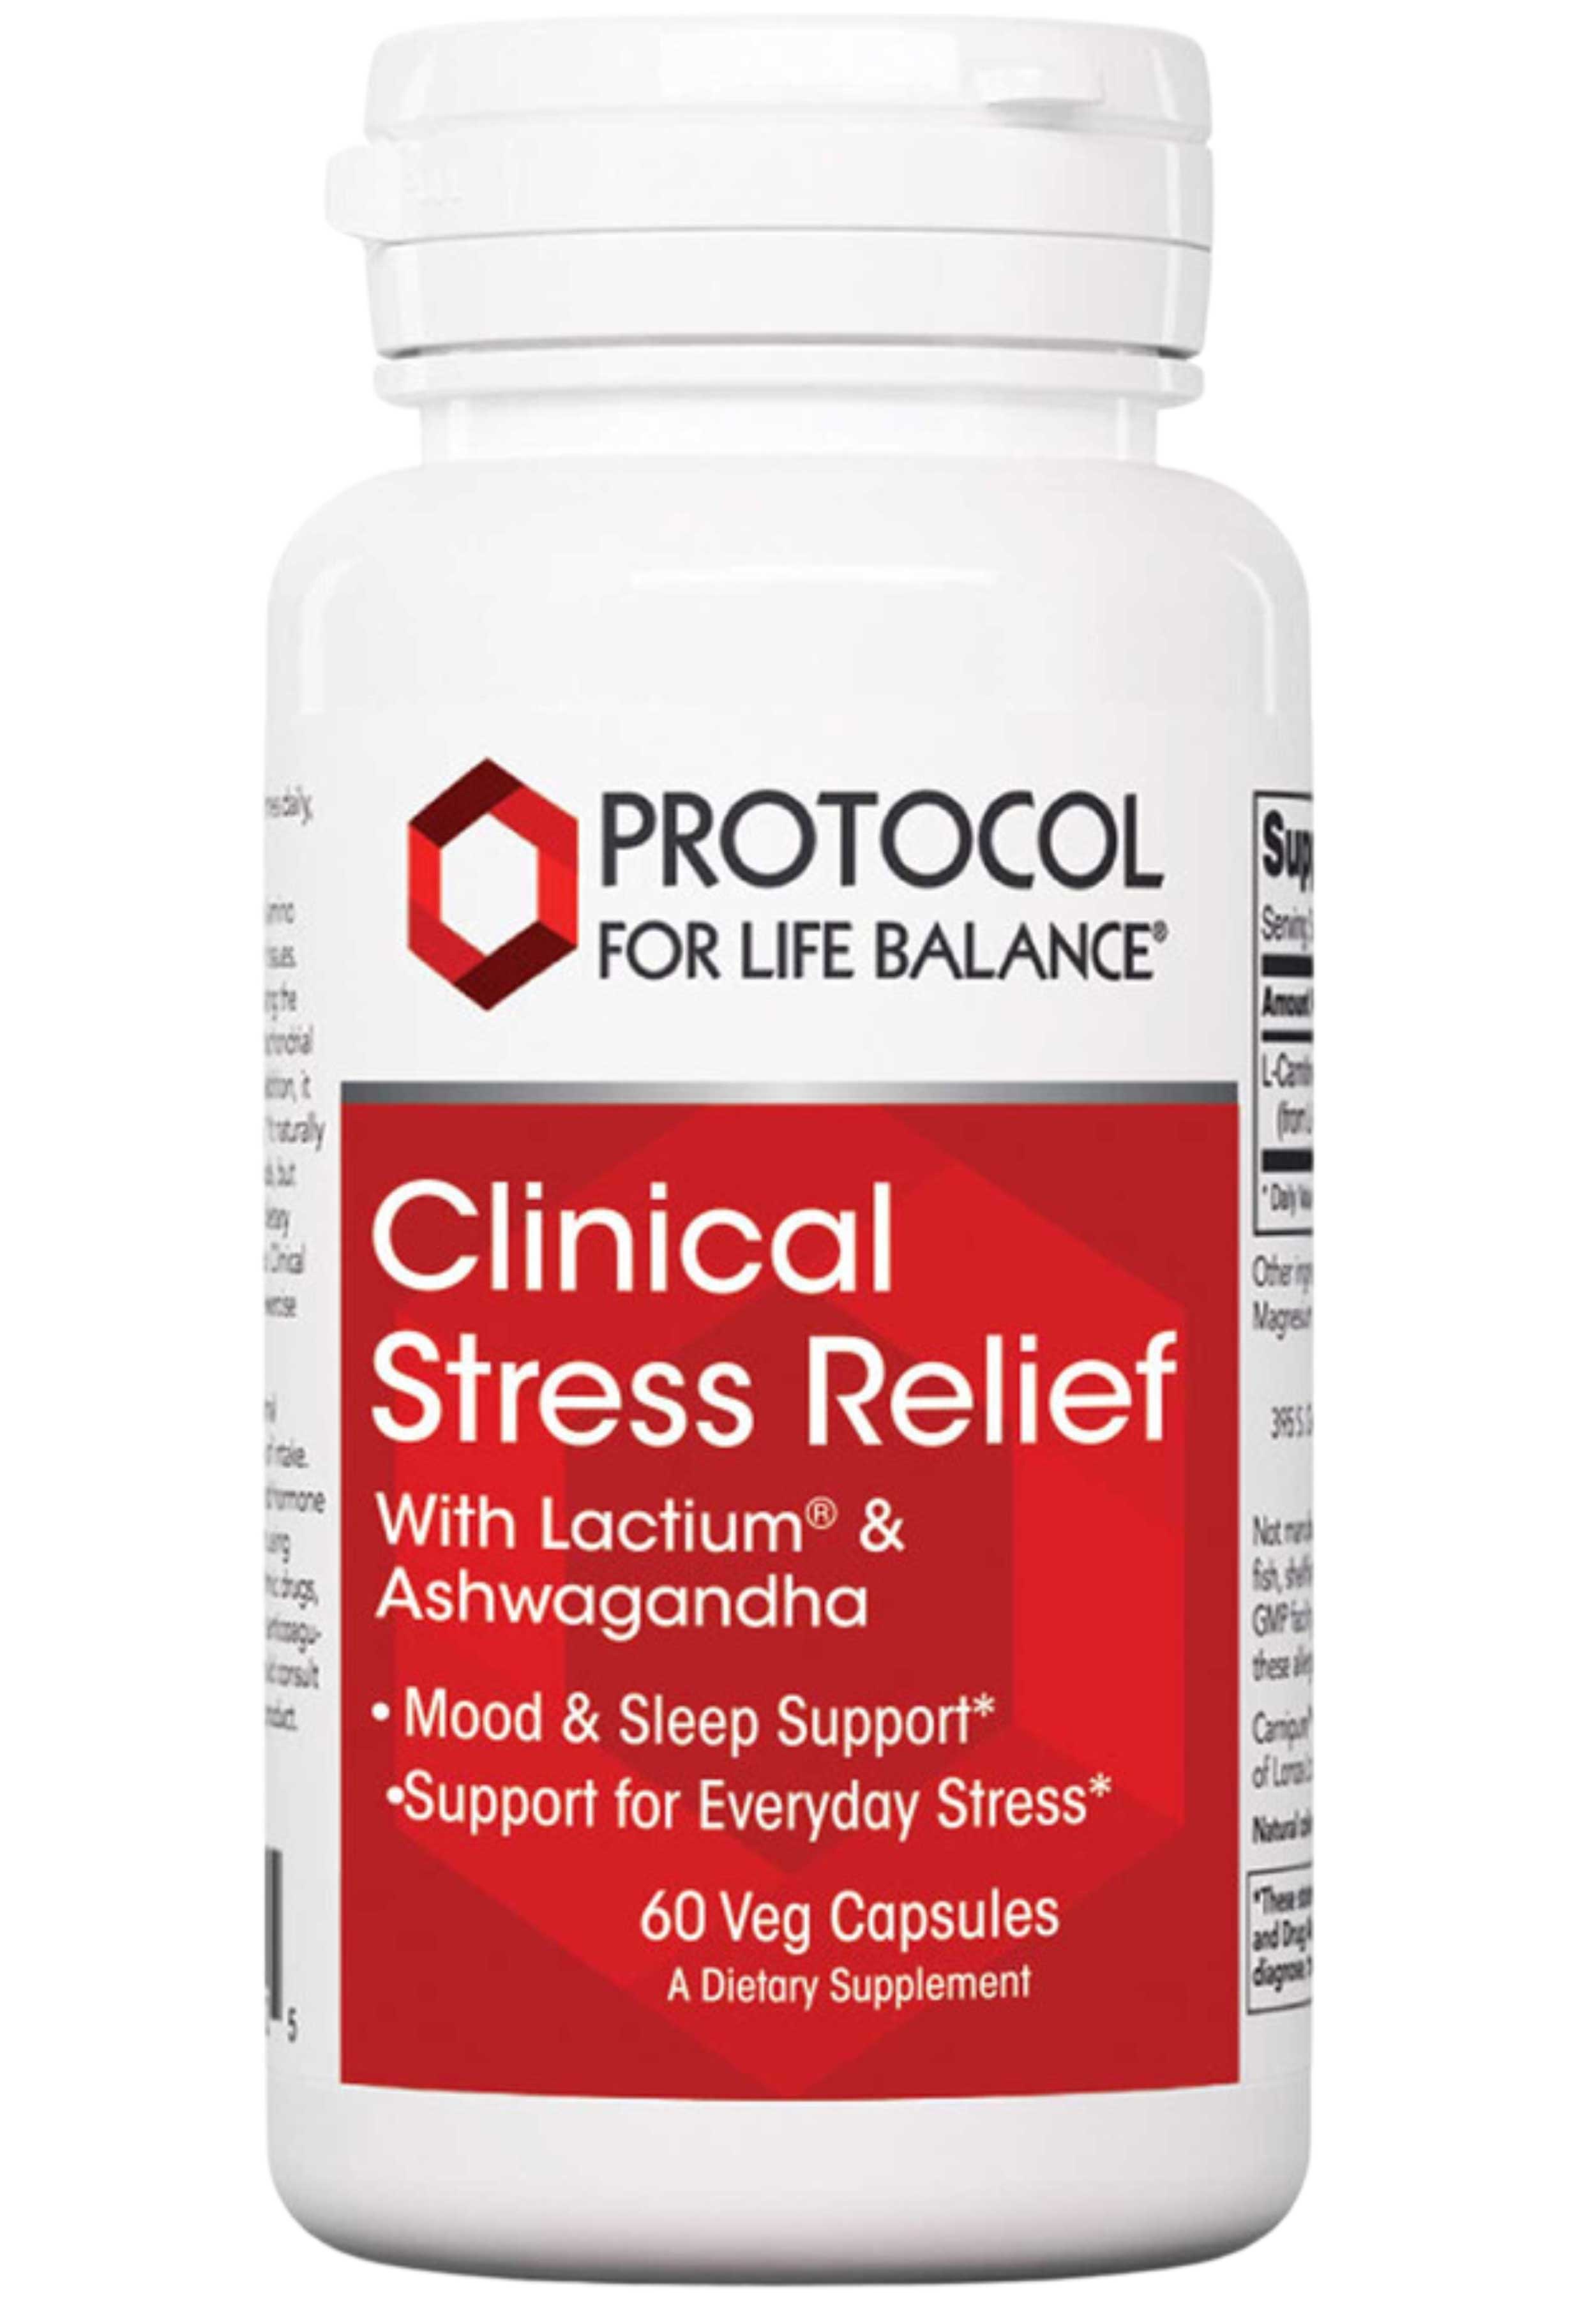 Protocol for Life Balance Clinical Stress Relief